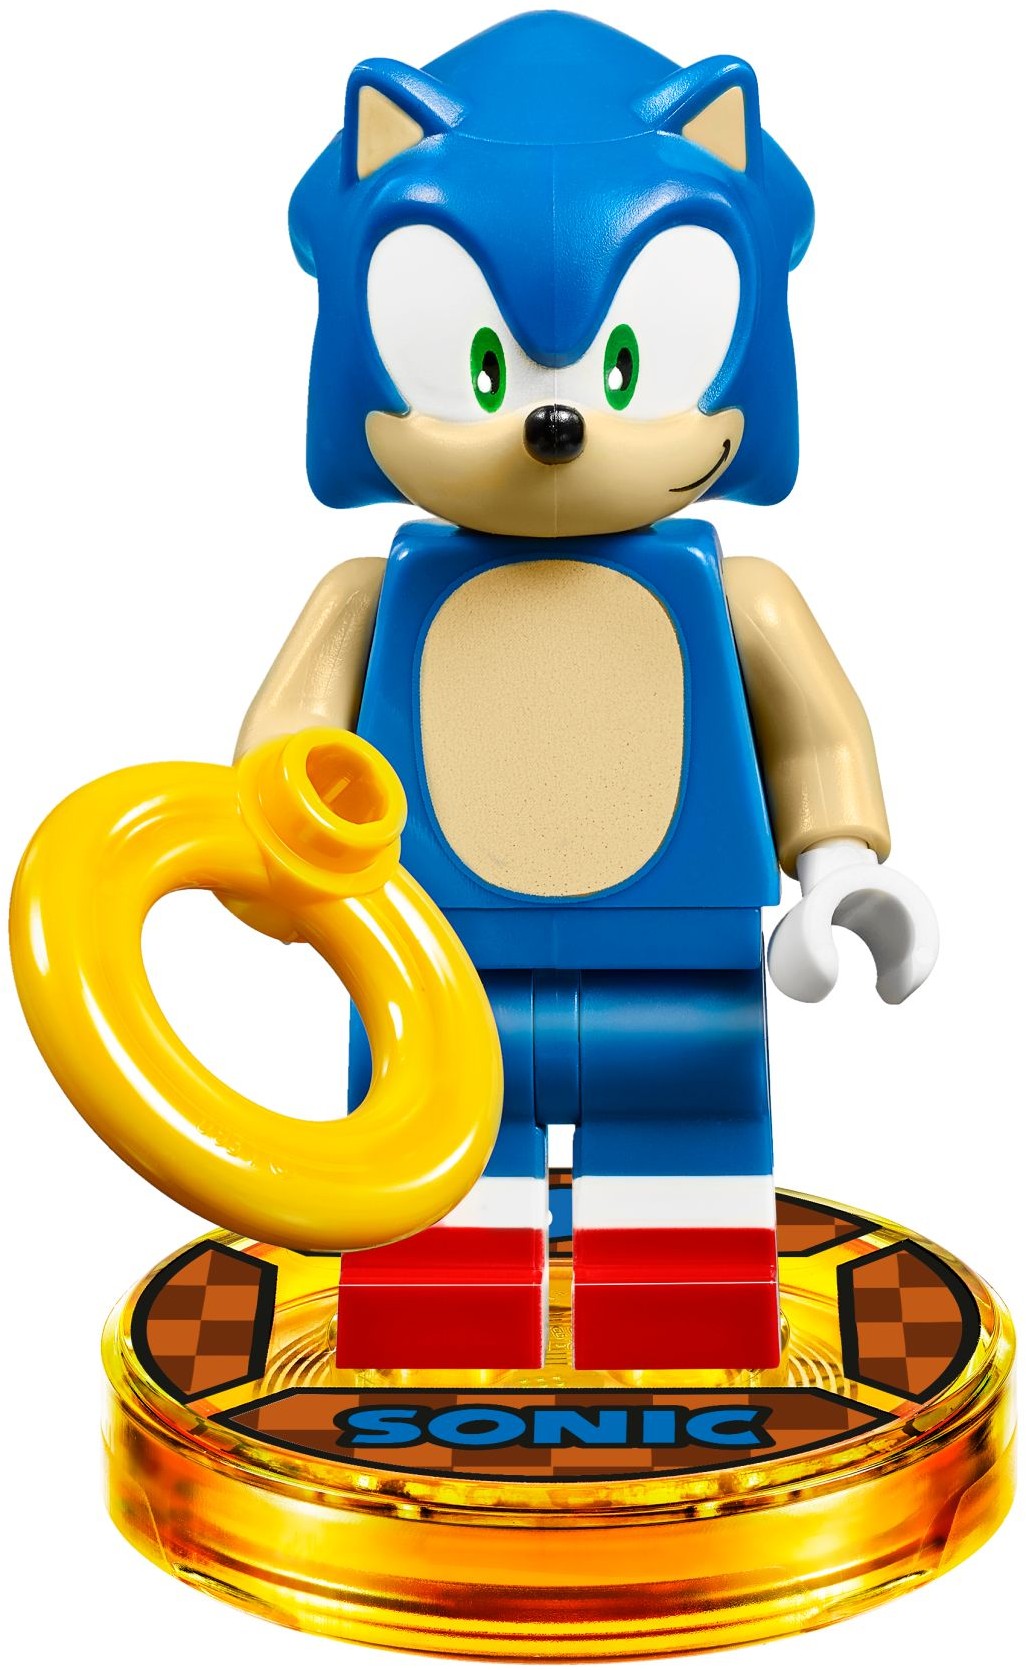 Lego Sonic the Hedgehog 71244 Level Pack Dimensions Minifigure